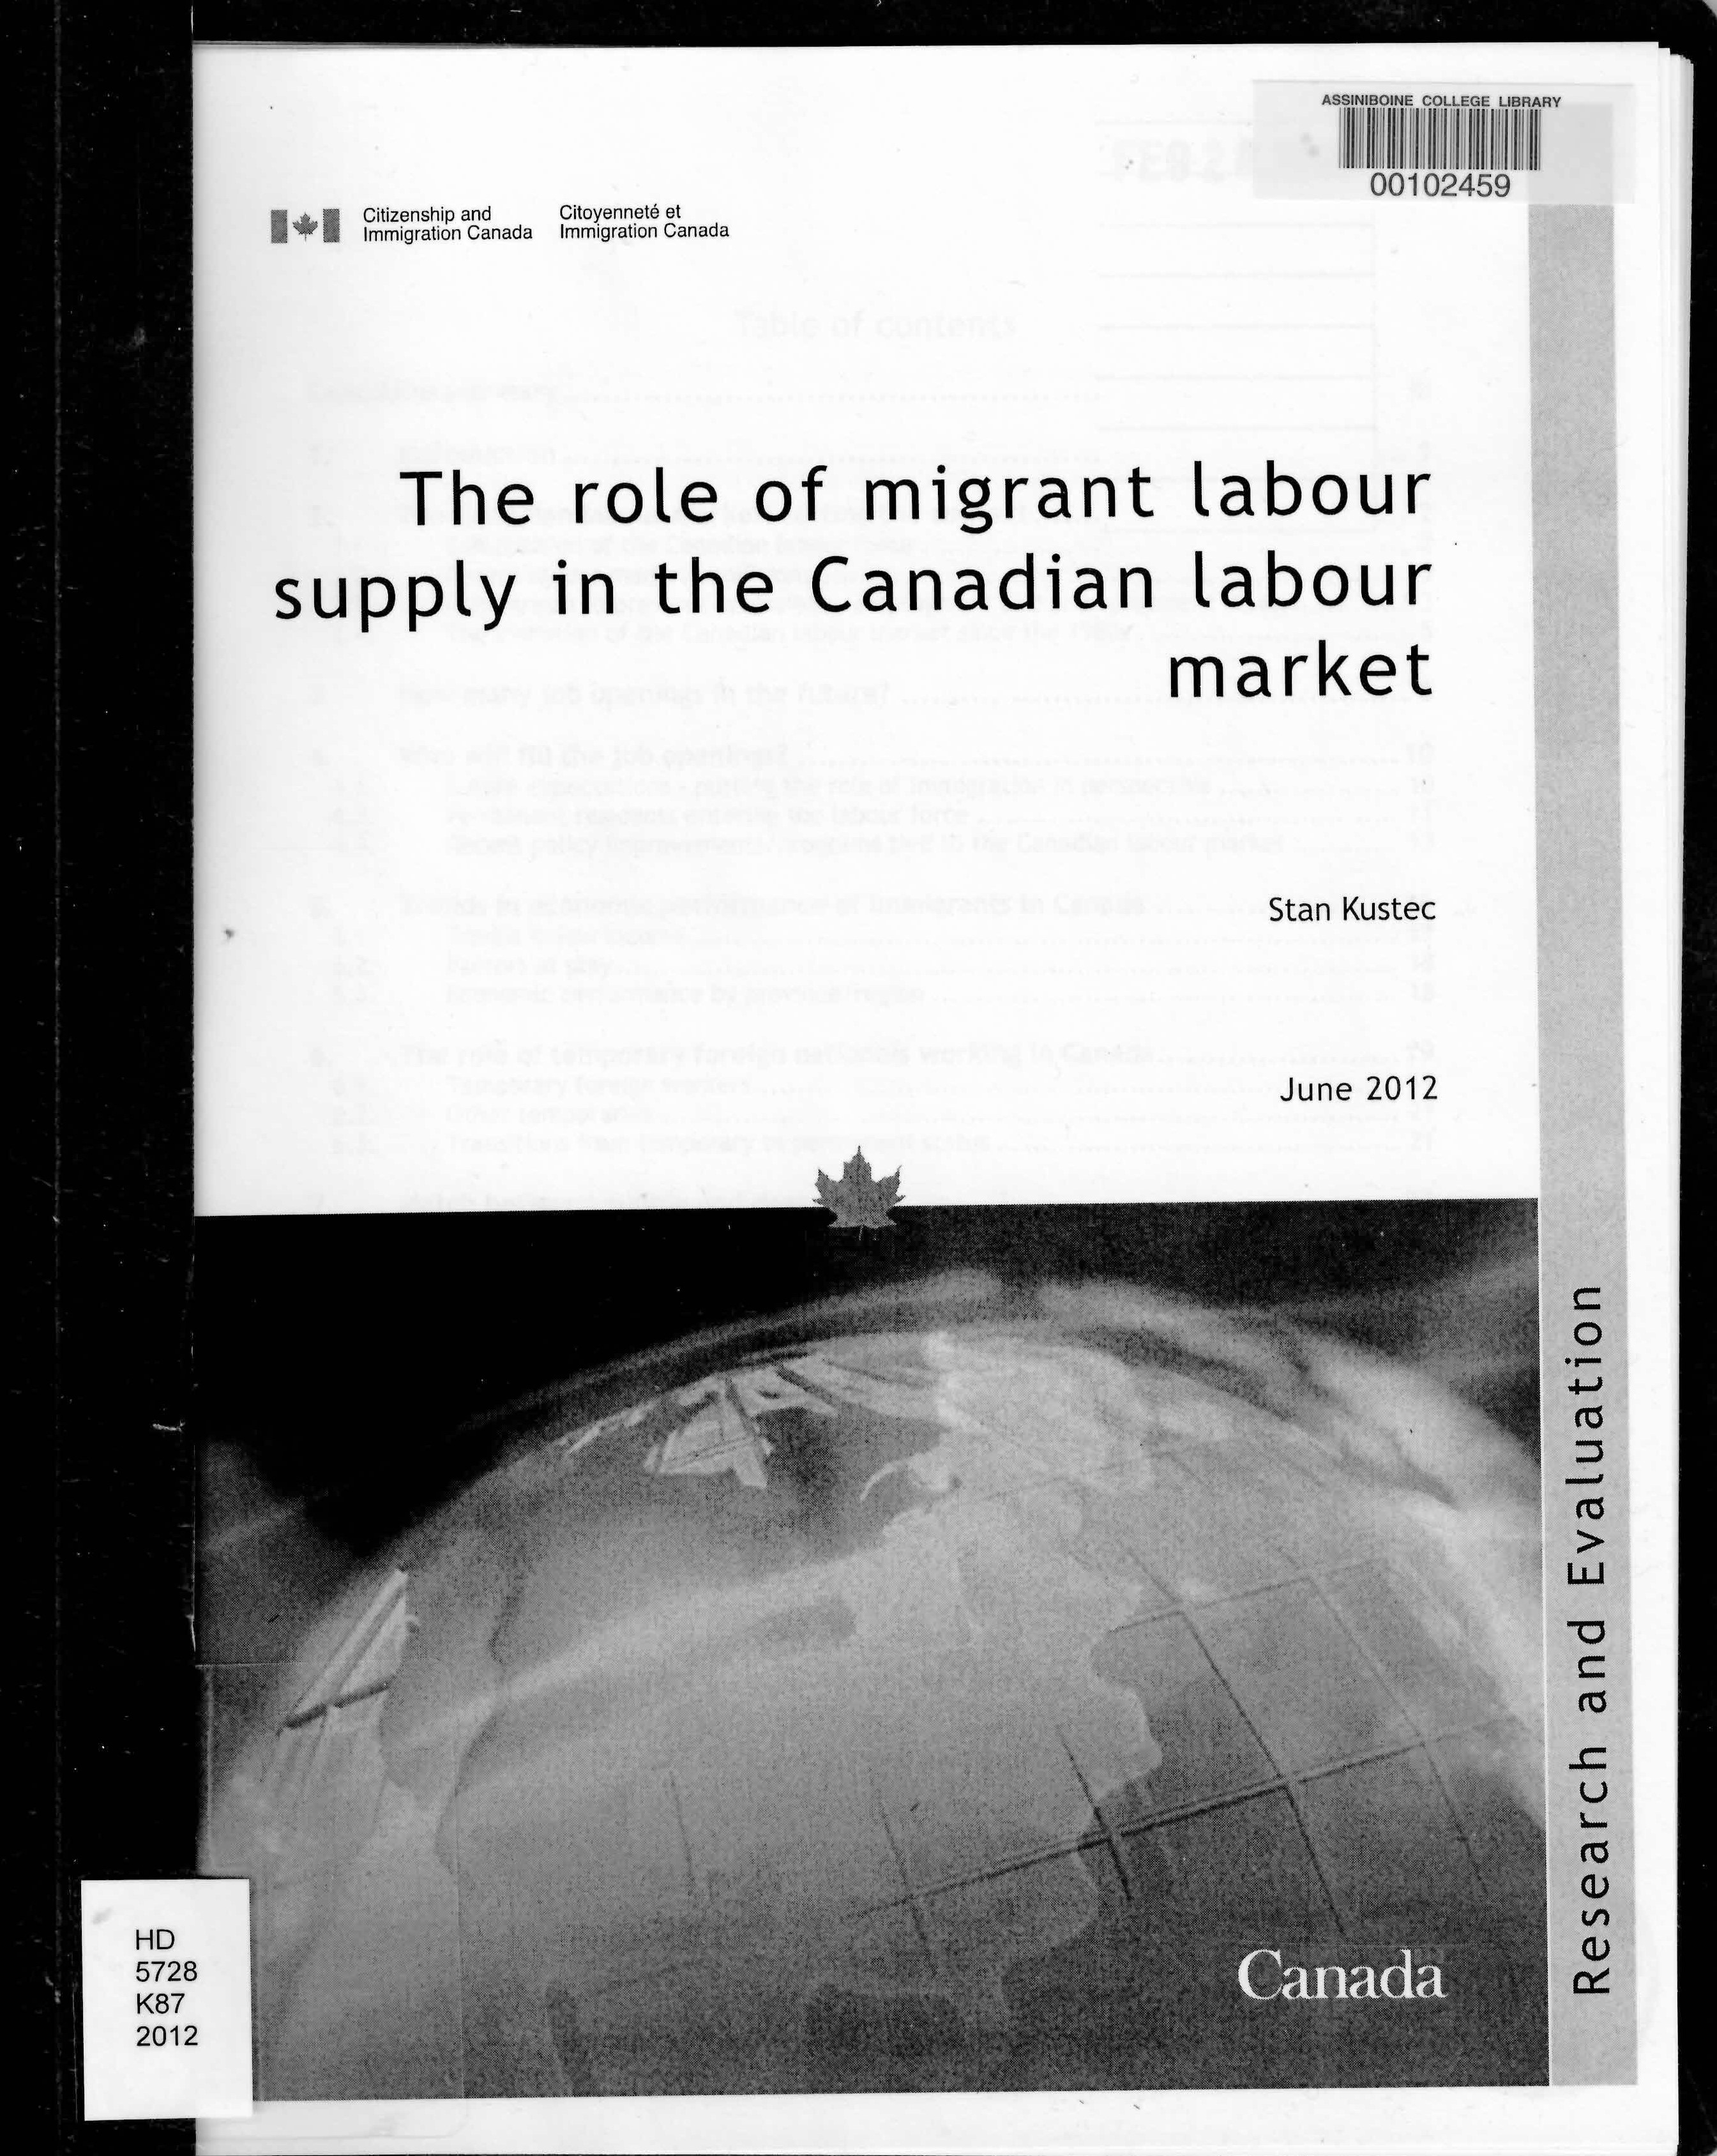 The role of migrant labour supply in the Canadian labour market